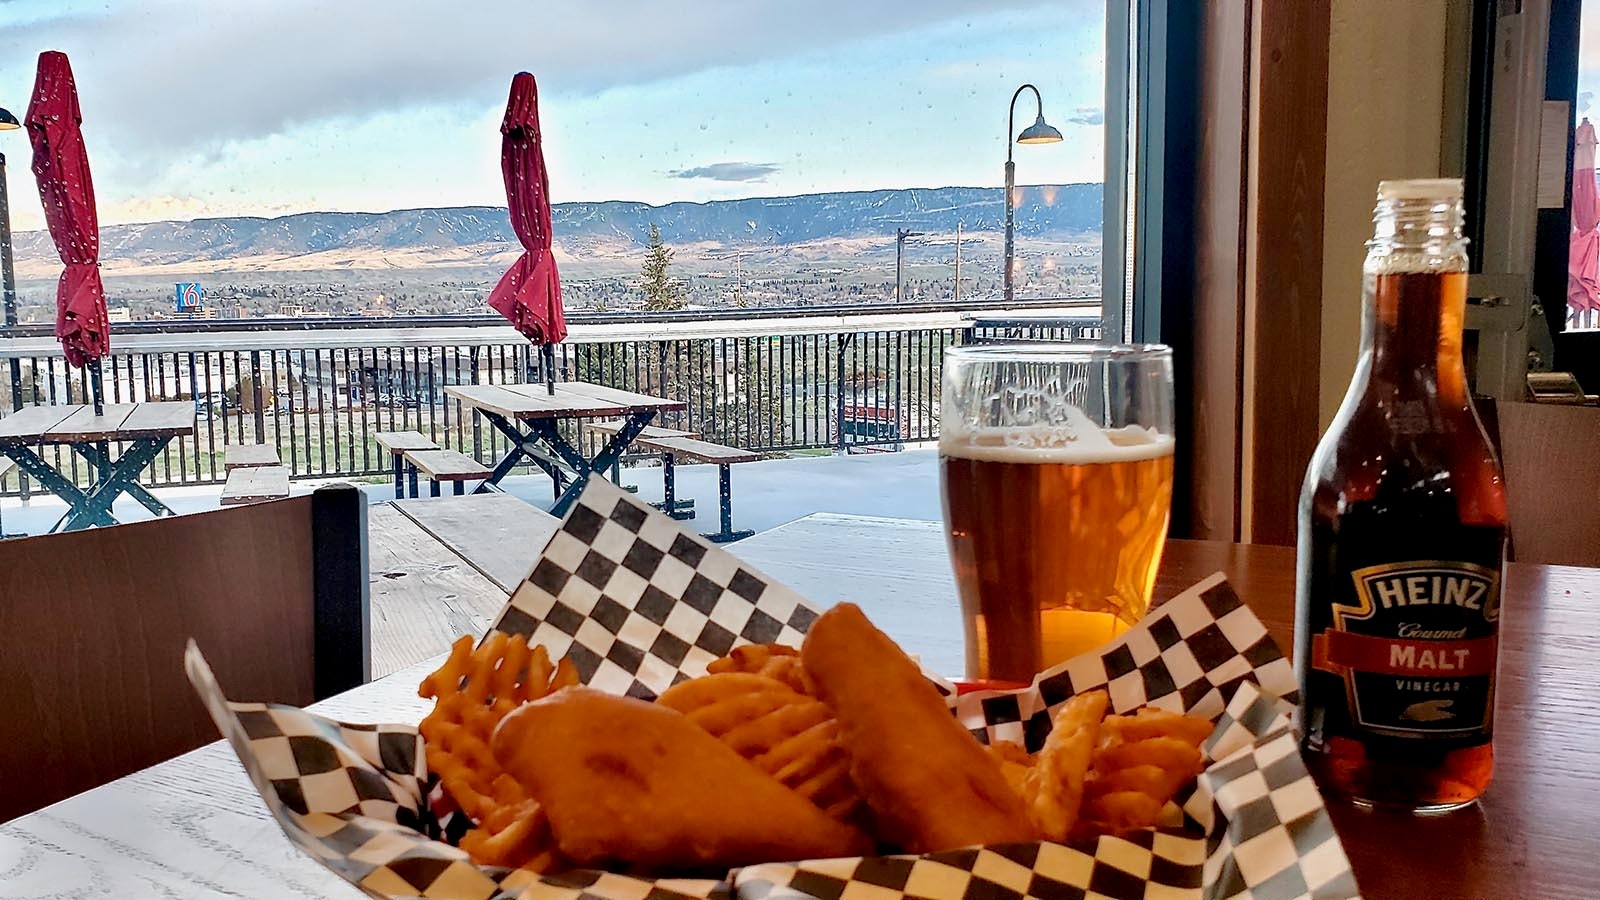 After the hike, fish and chips with a North Platte beer to watch the sunset by with Casper in the distance.